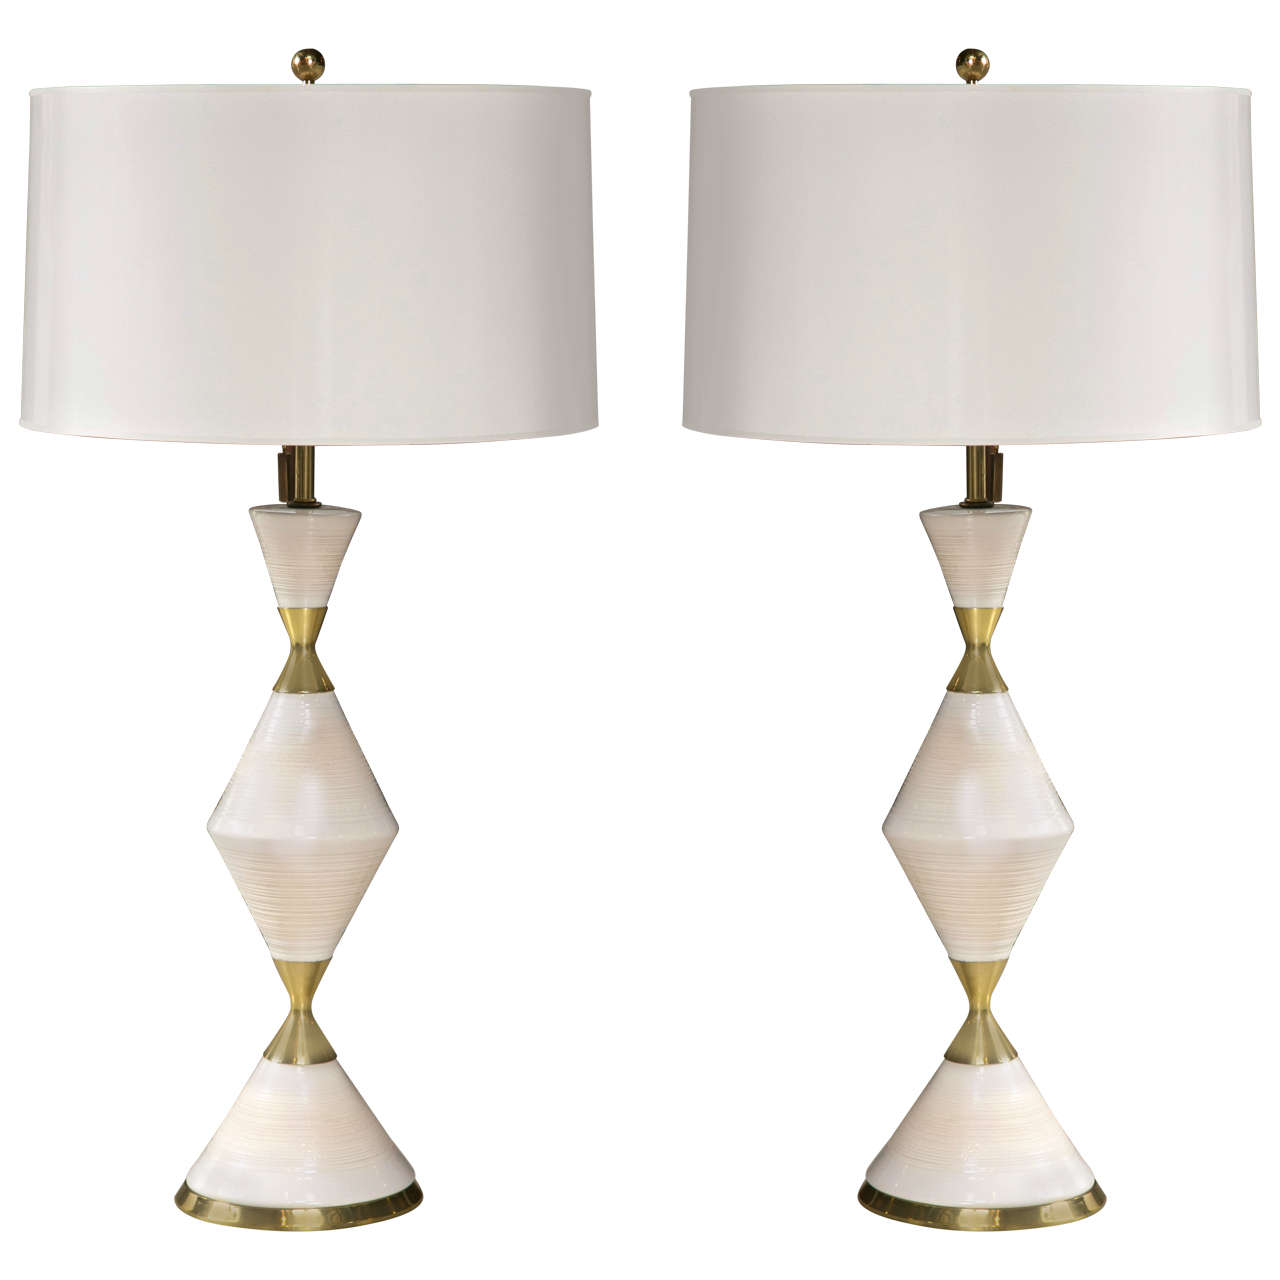 Gerald Thurston table Lamps